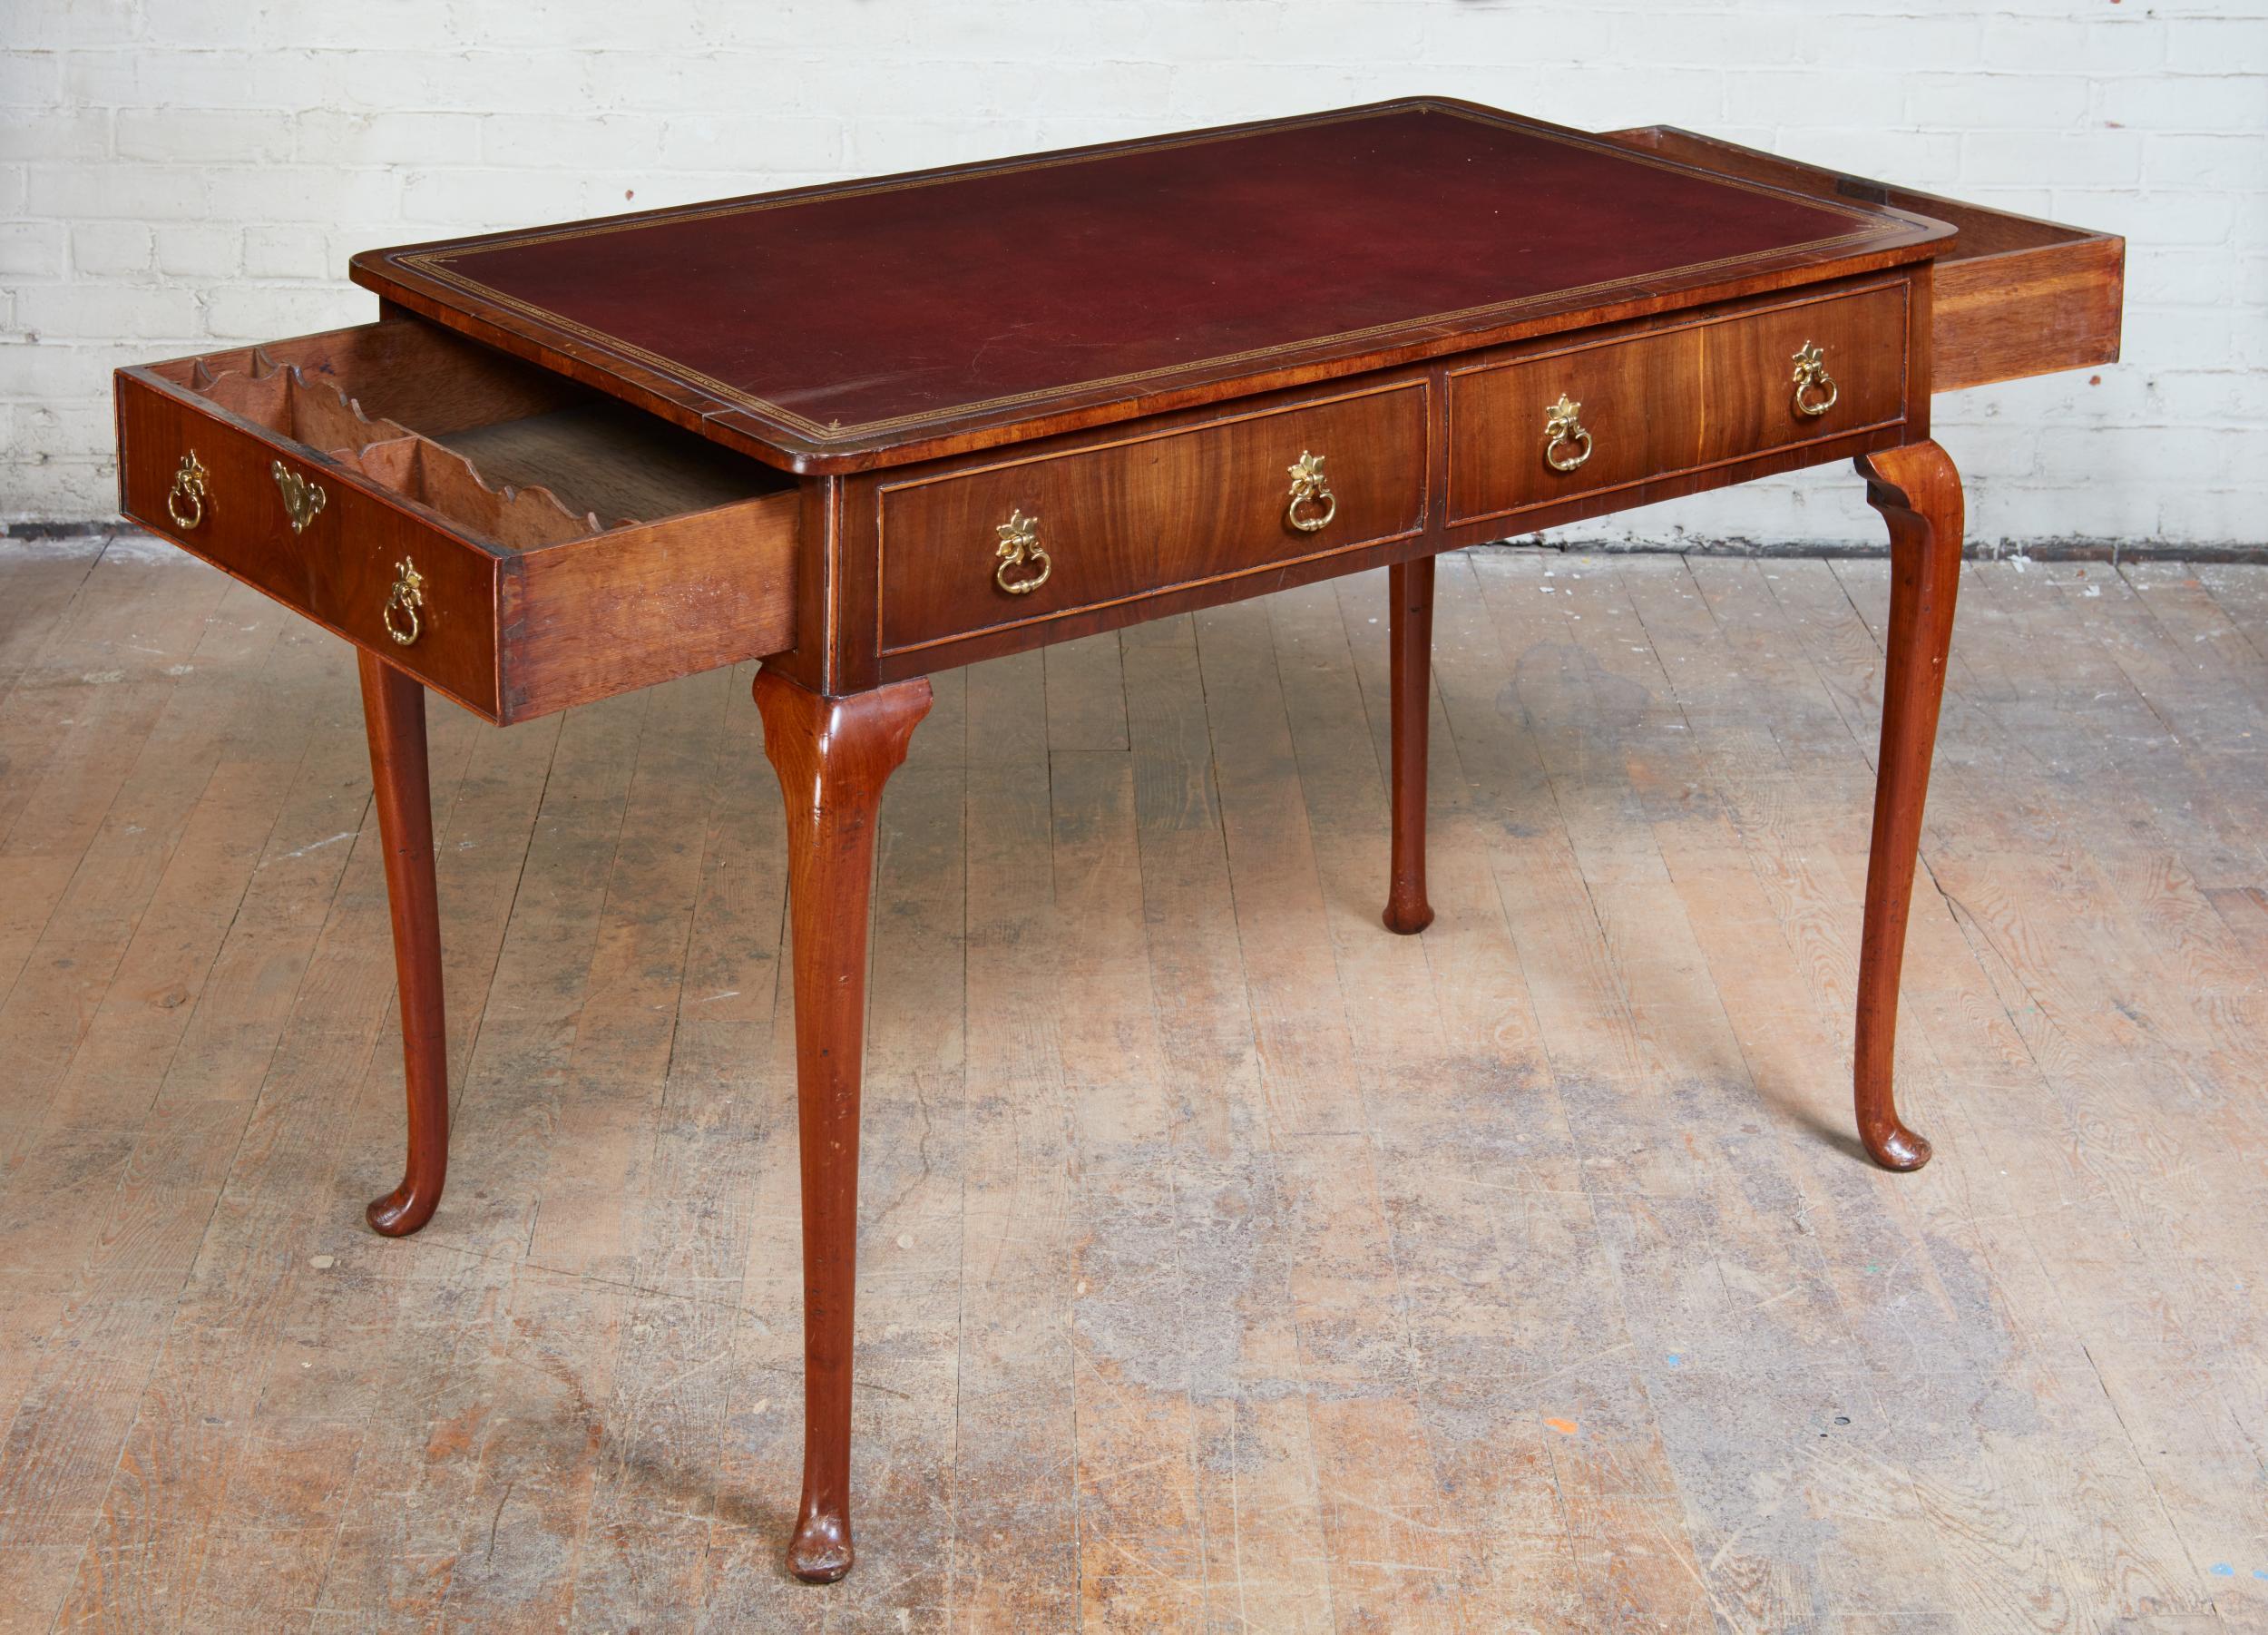 Fine and rare Queen Anne walnut writing table, the leather lined top with walnut crossbanding, all four sides finished with drawers (two real - on the ends and four false - on the sides) one-drawer with scalloped dividers, standing on cabriole legs